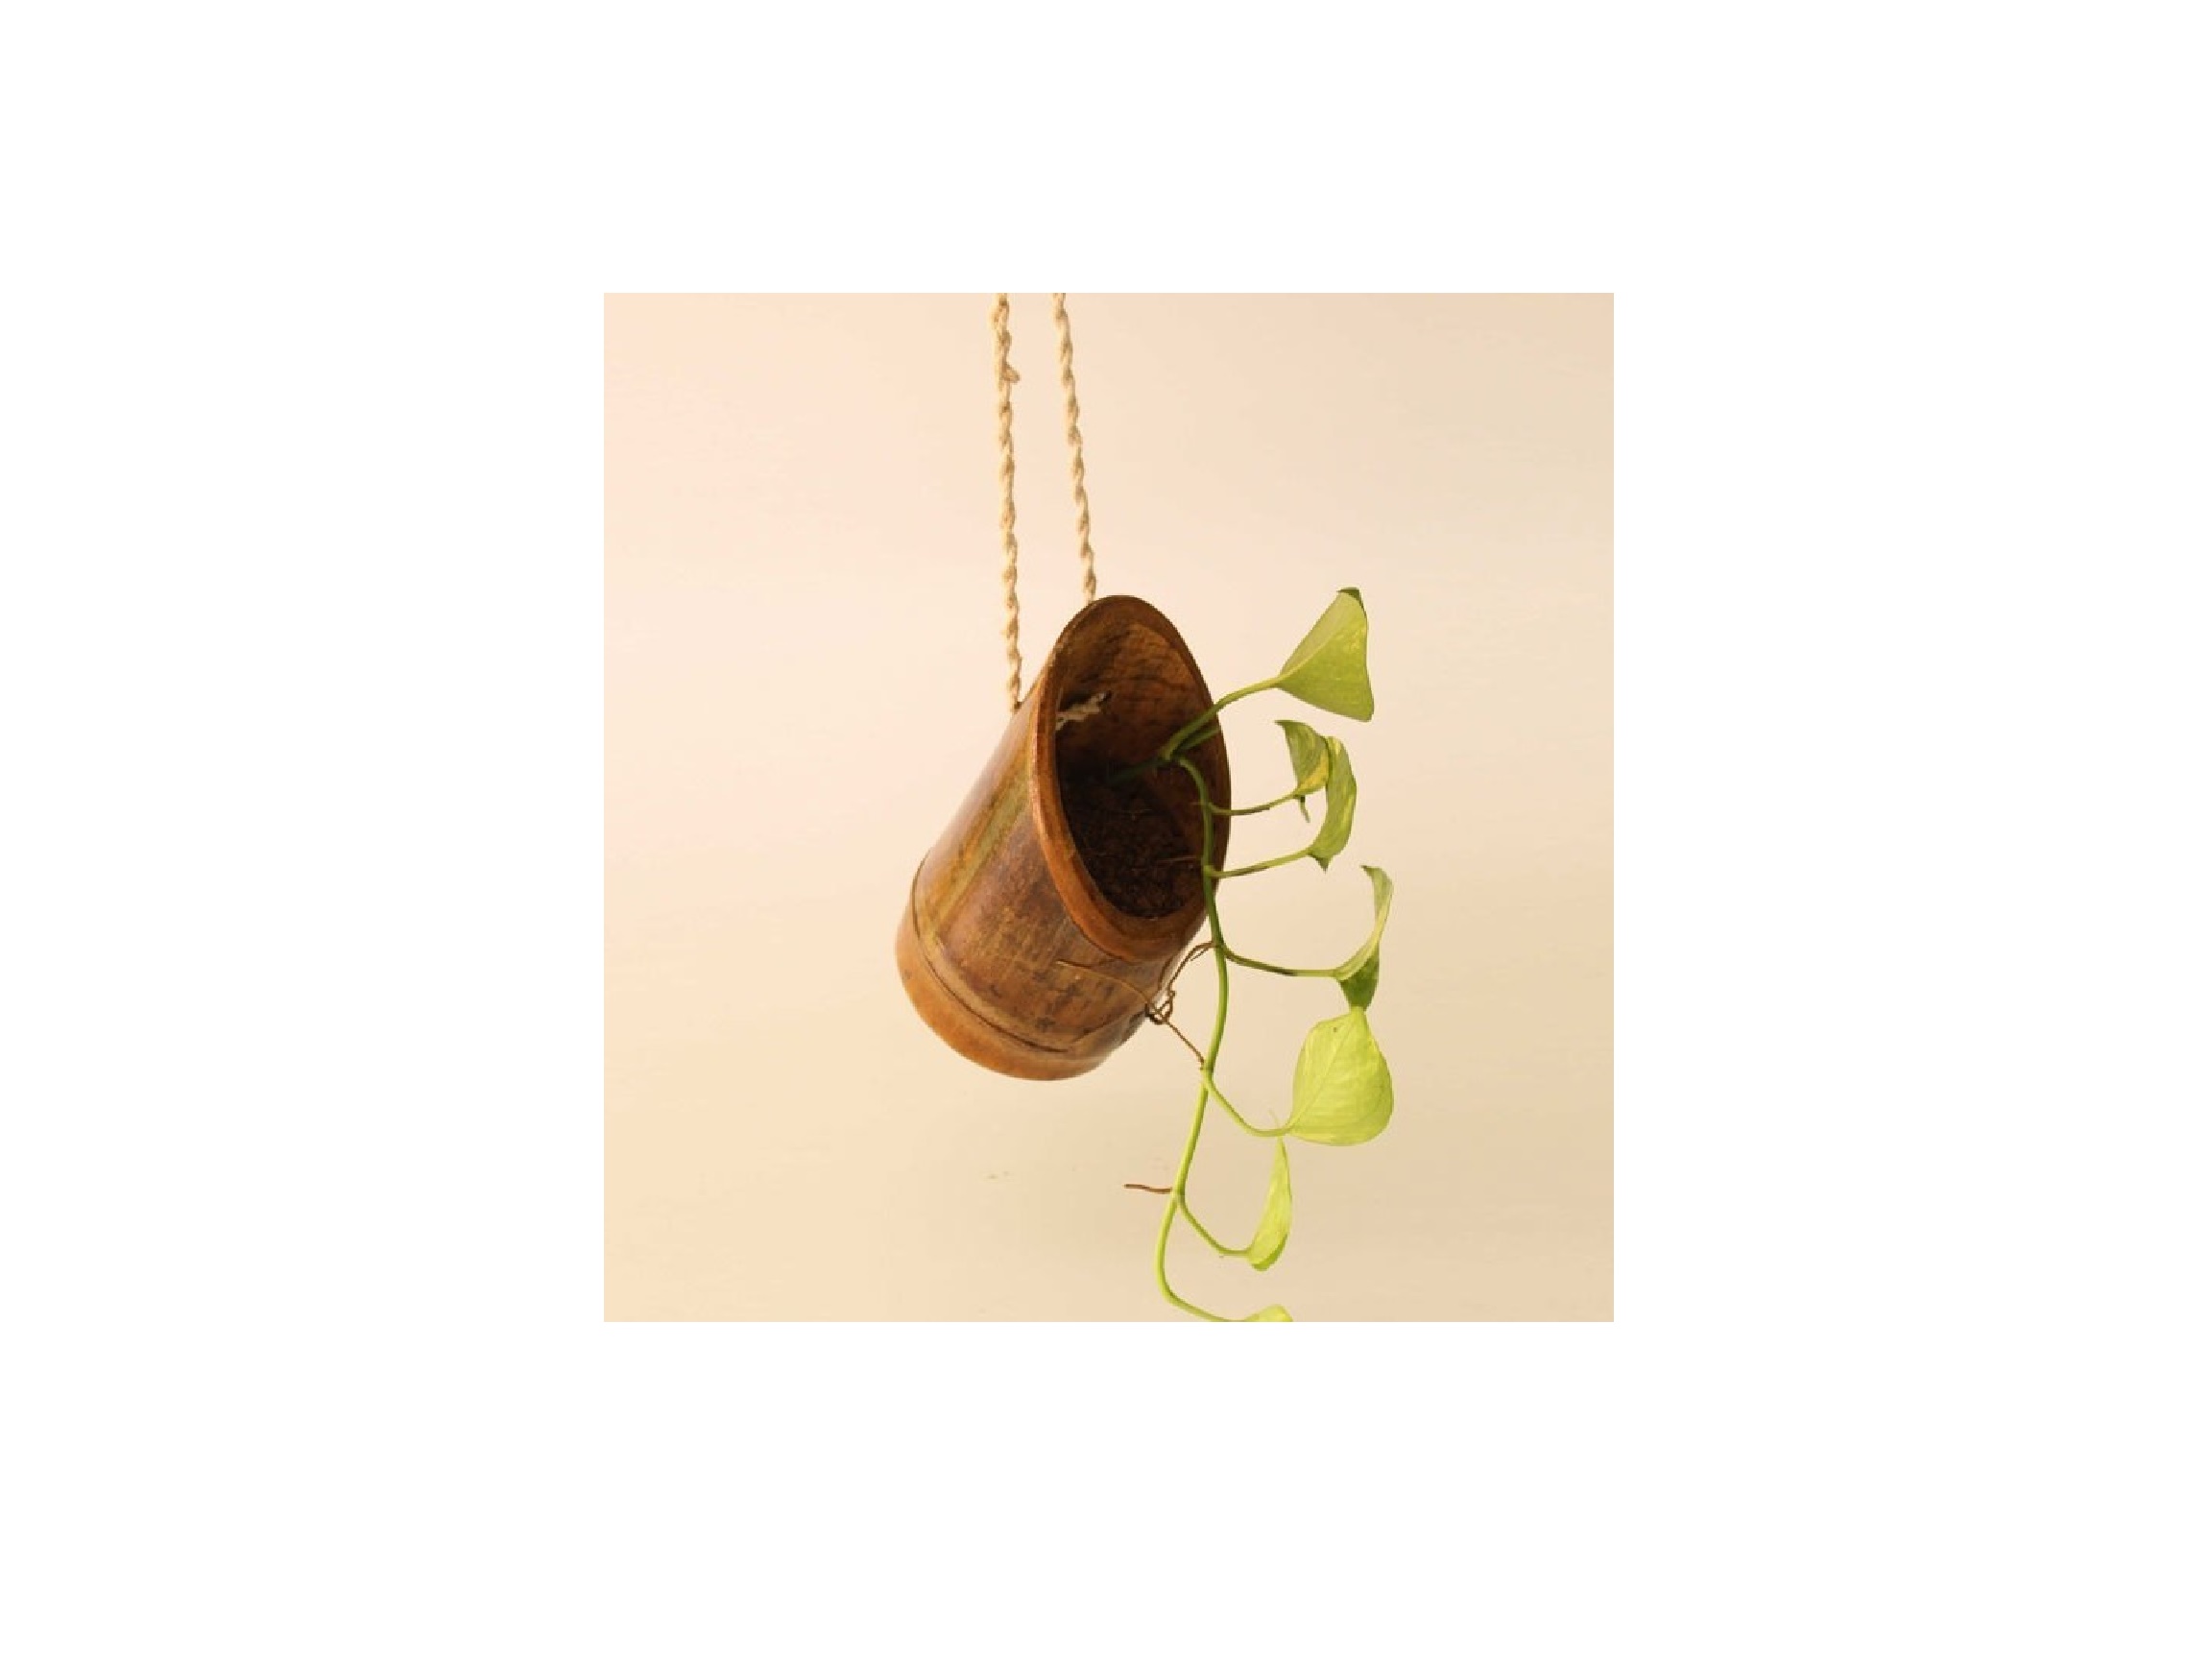  Bamboo, Tapered Hanging Planter